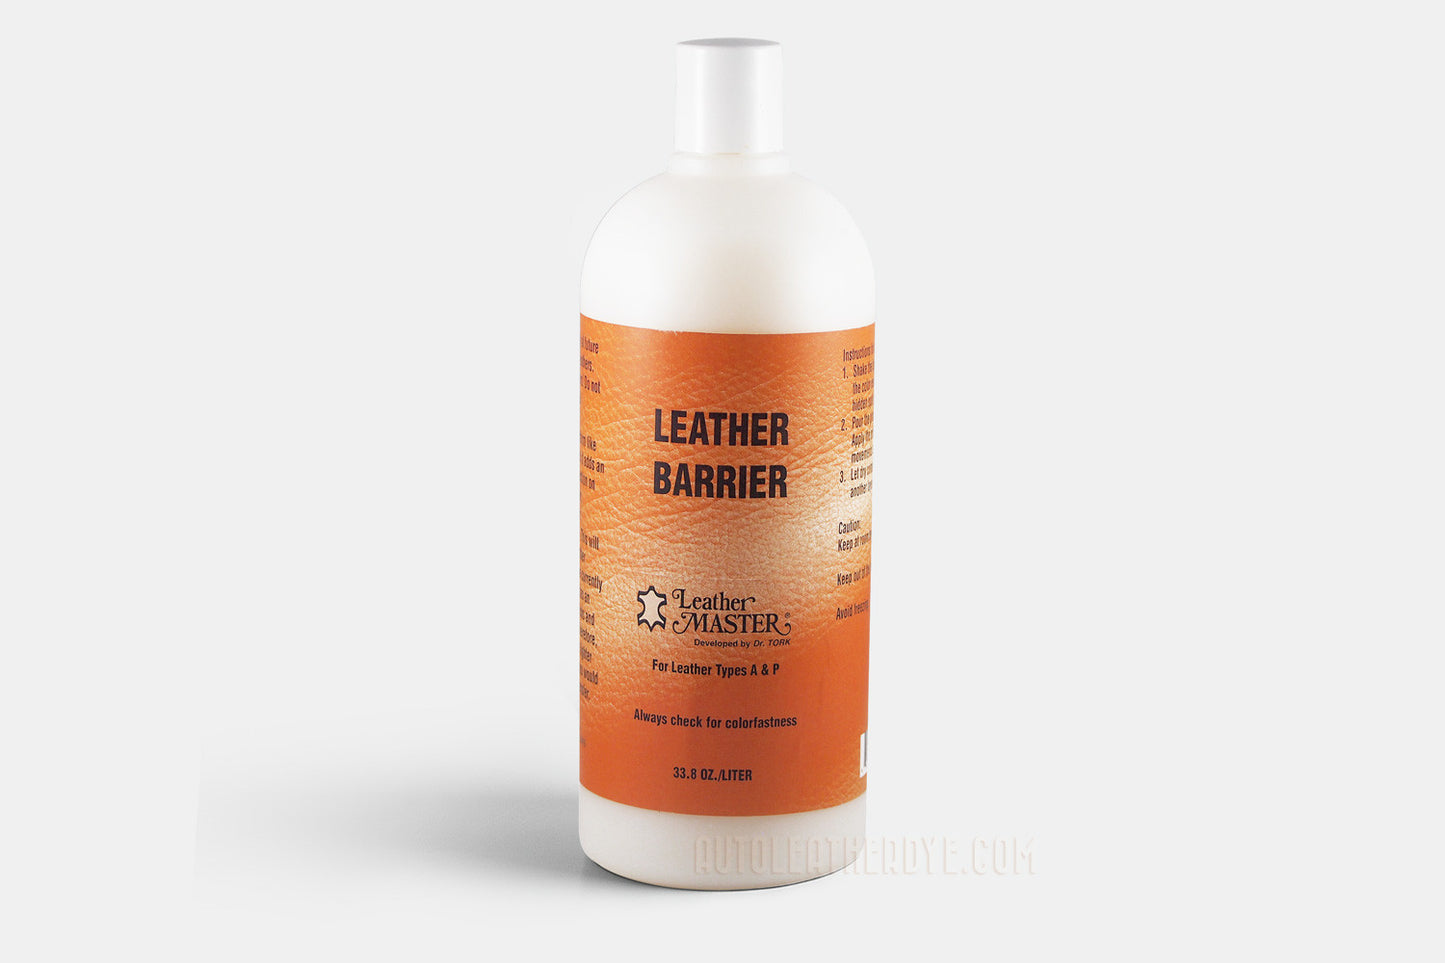 Leather Master Foam Cleaner – Auto Leather Dye